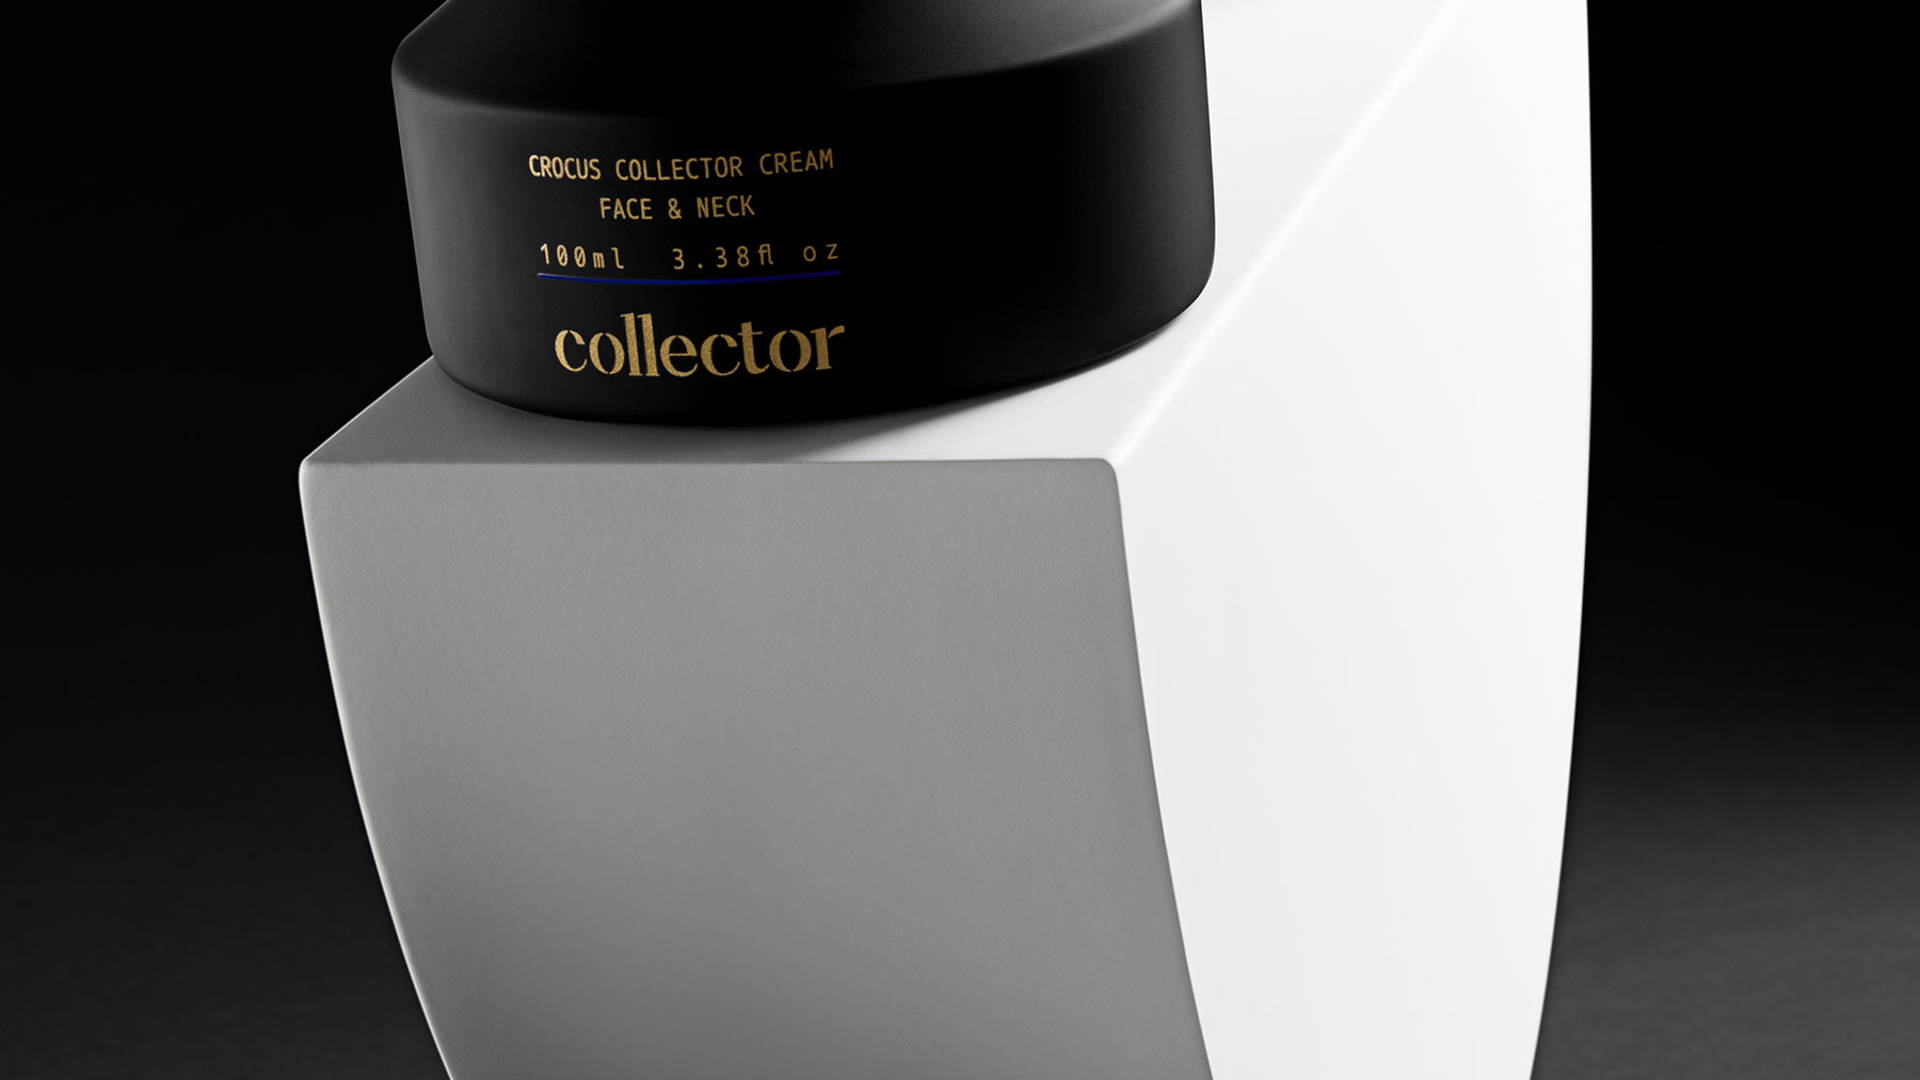 Featured image for This Natural Cosmetics Brand Has Some Seriously Sleek Packaging